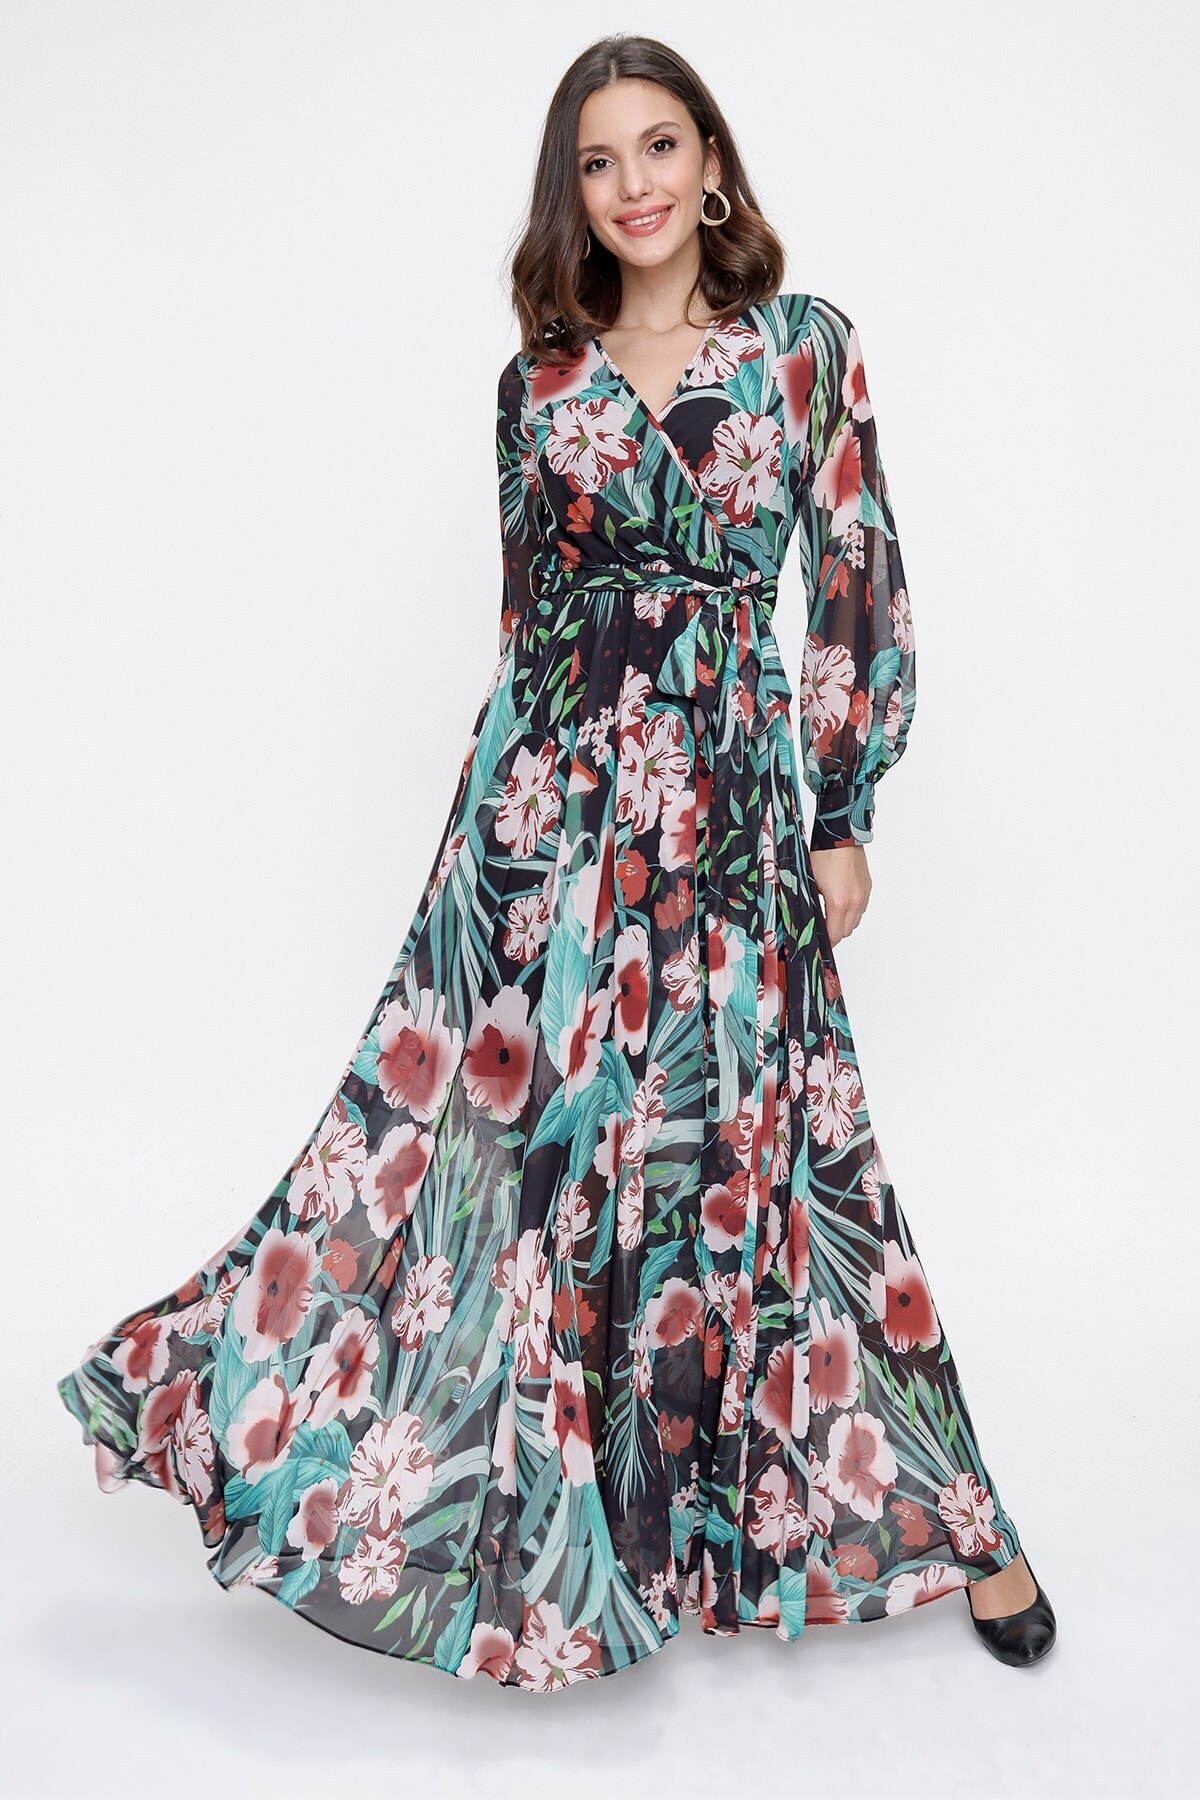 Levně By Saygı Double Breasted Neck Long Sleeve Lined Floral Print Chiffon Long Dress Green